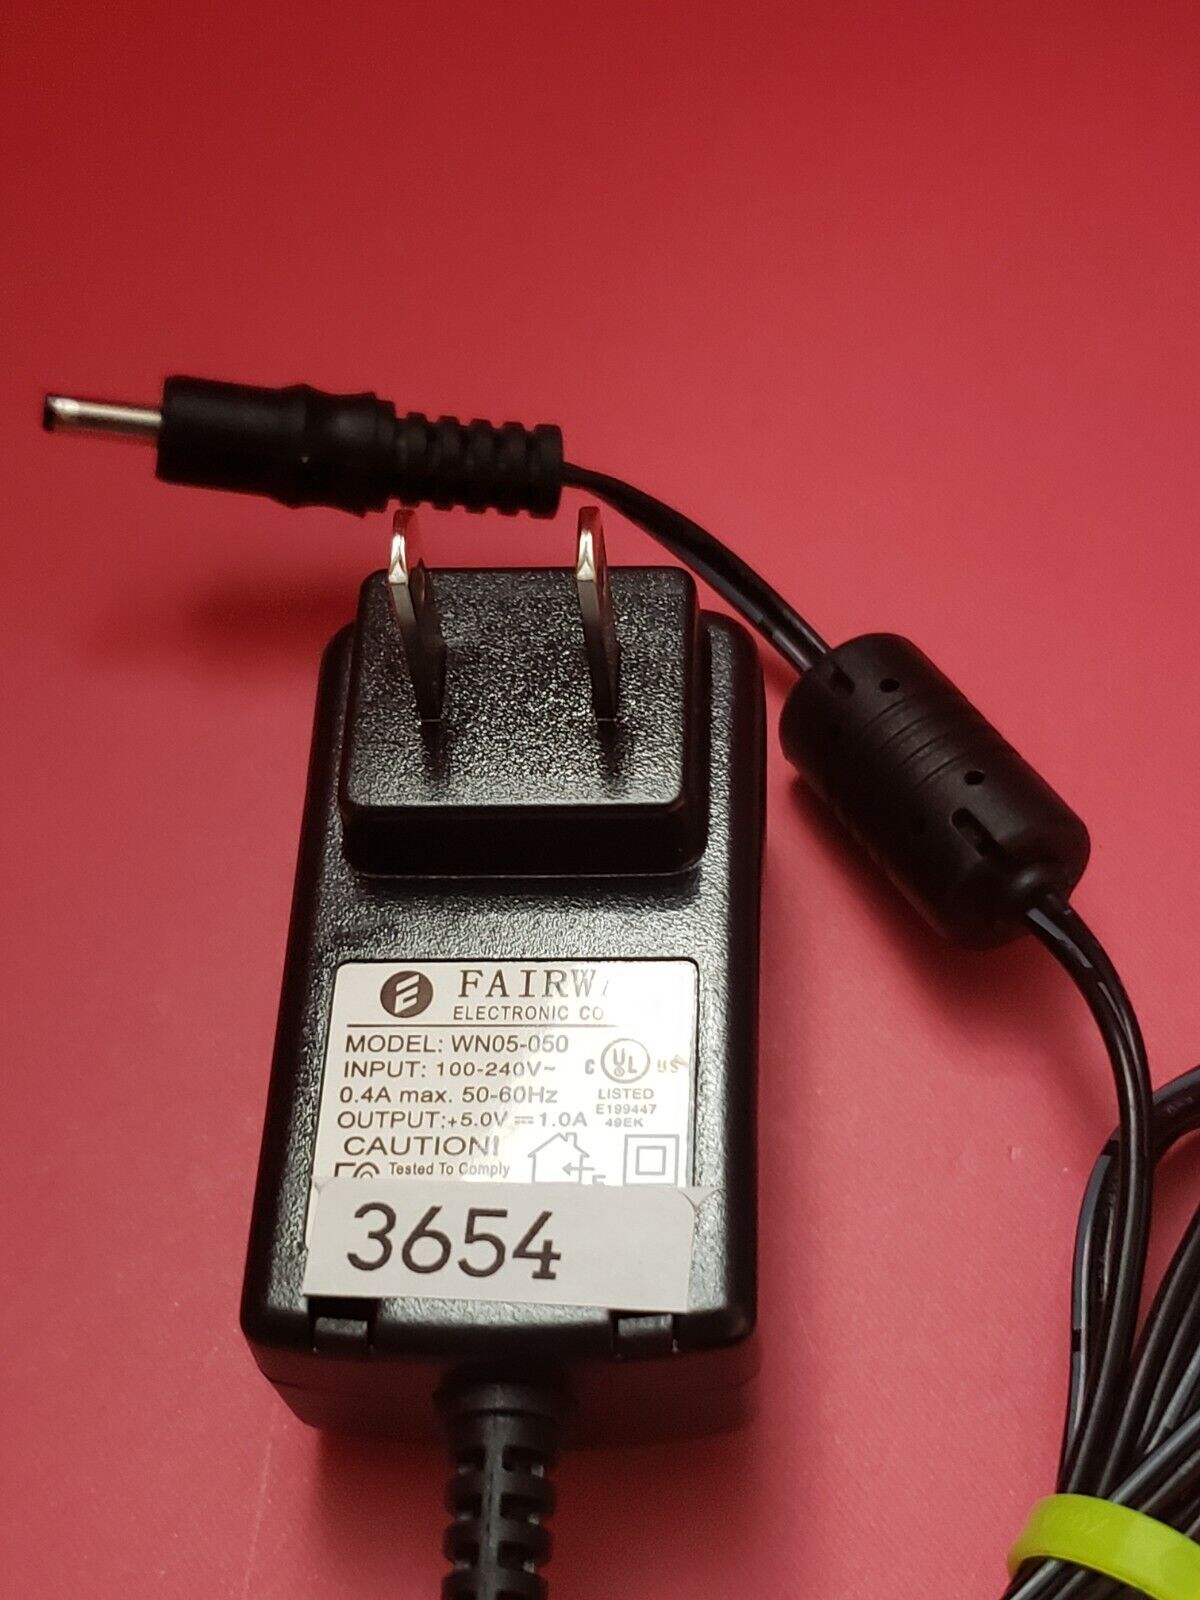 FAIRWAY POWER ADAPTER WN05-050 5V 1A Type: Adapter Features: Powered MPN: WN05-050 Output Voltage: 5 V Brand: FA